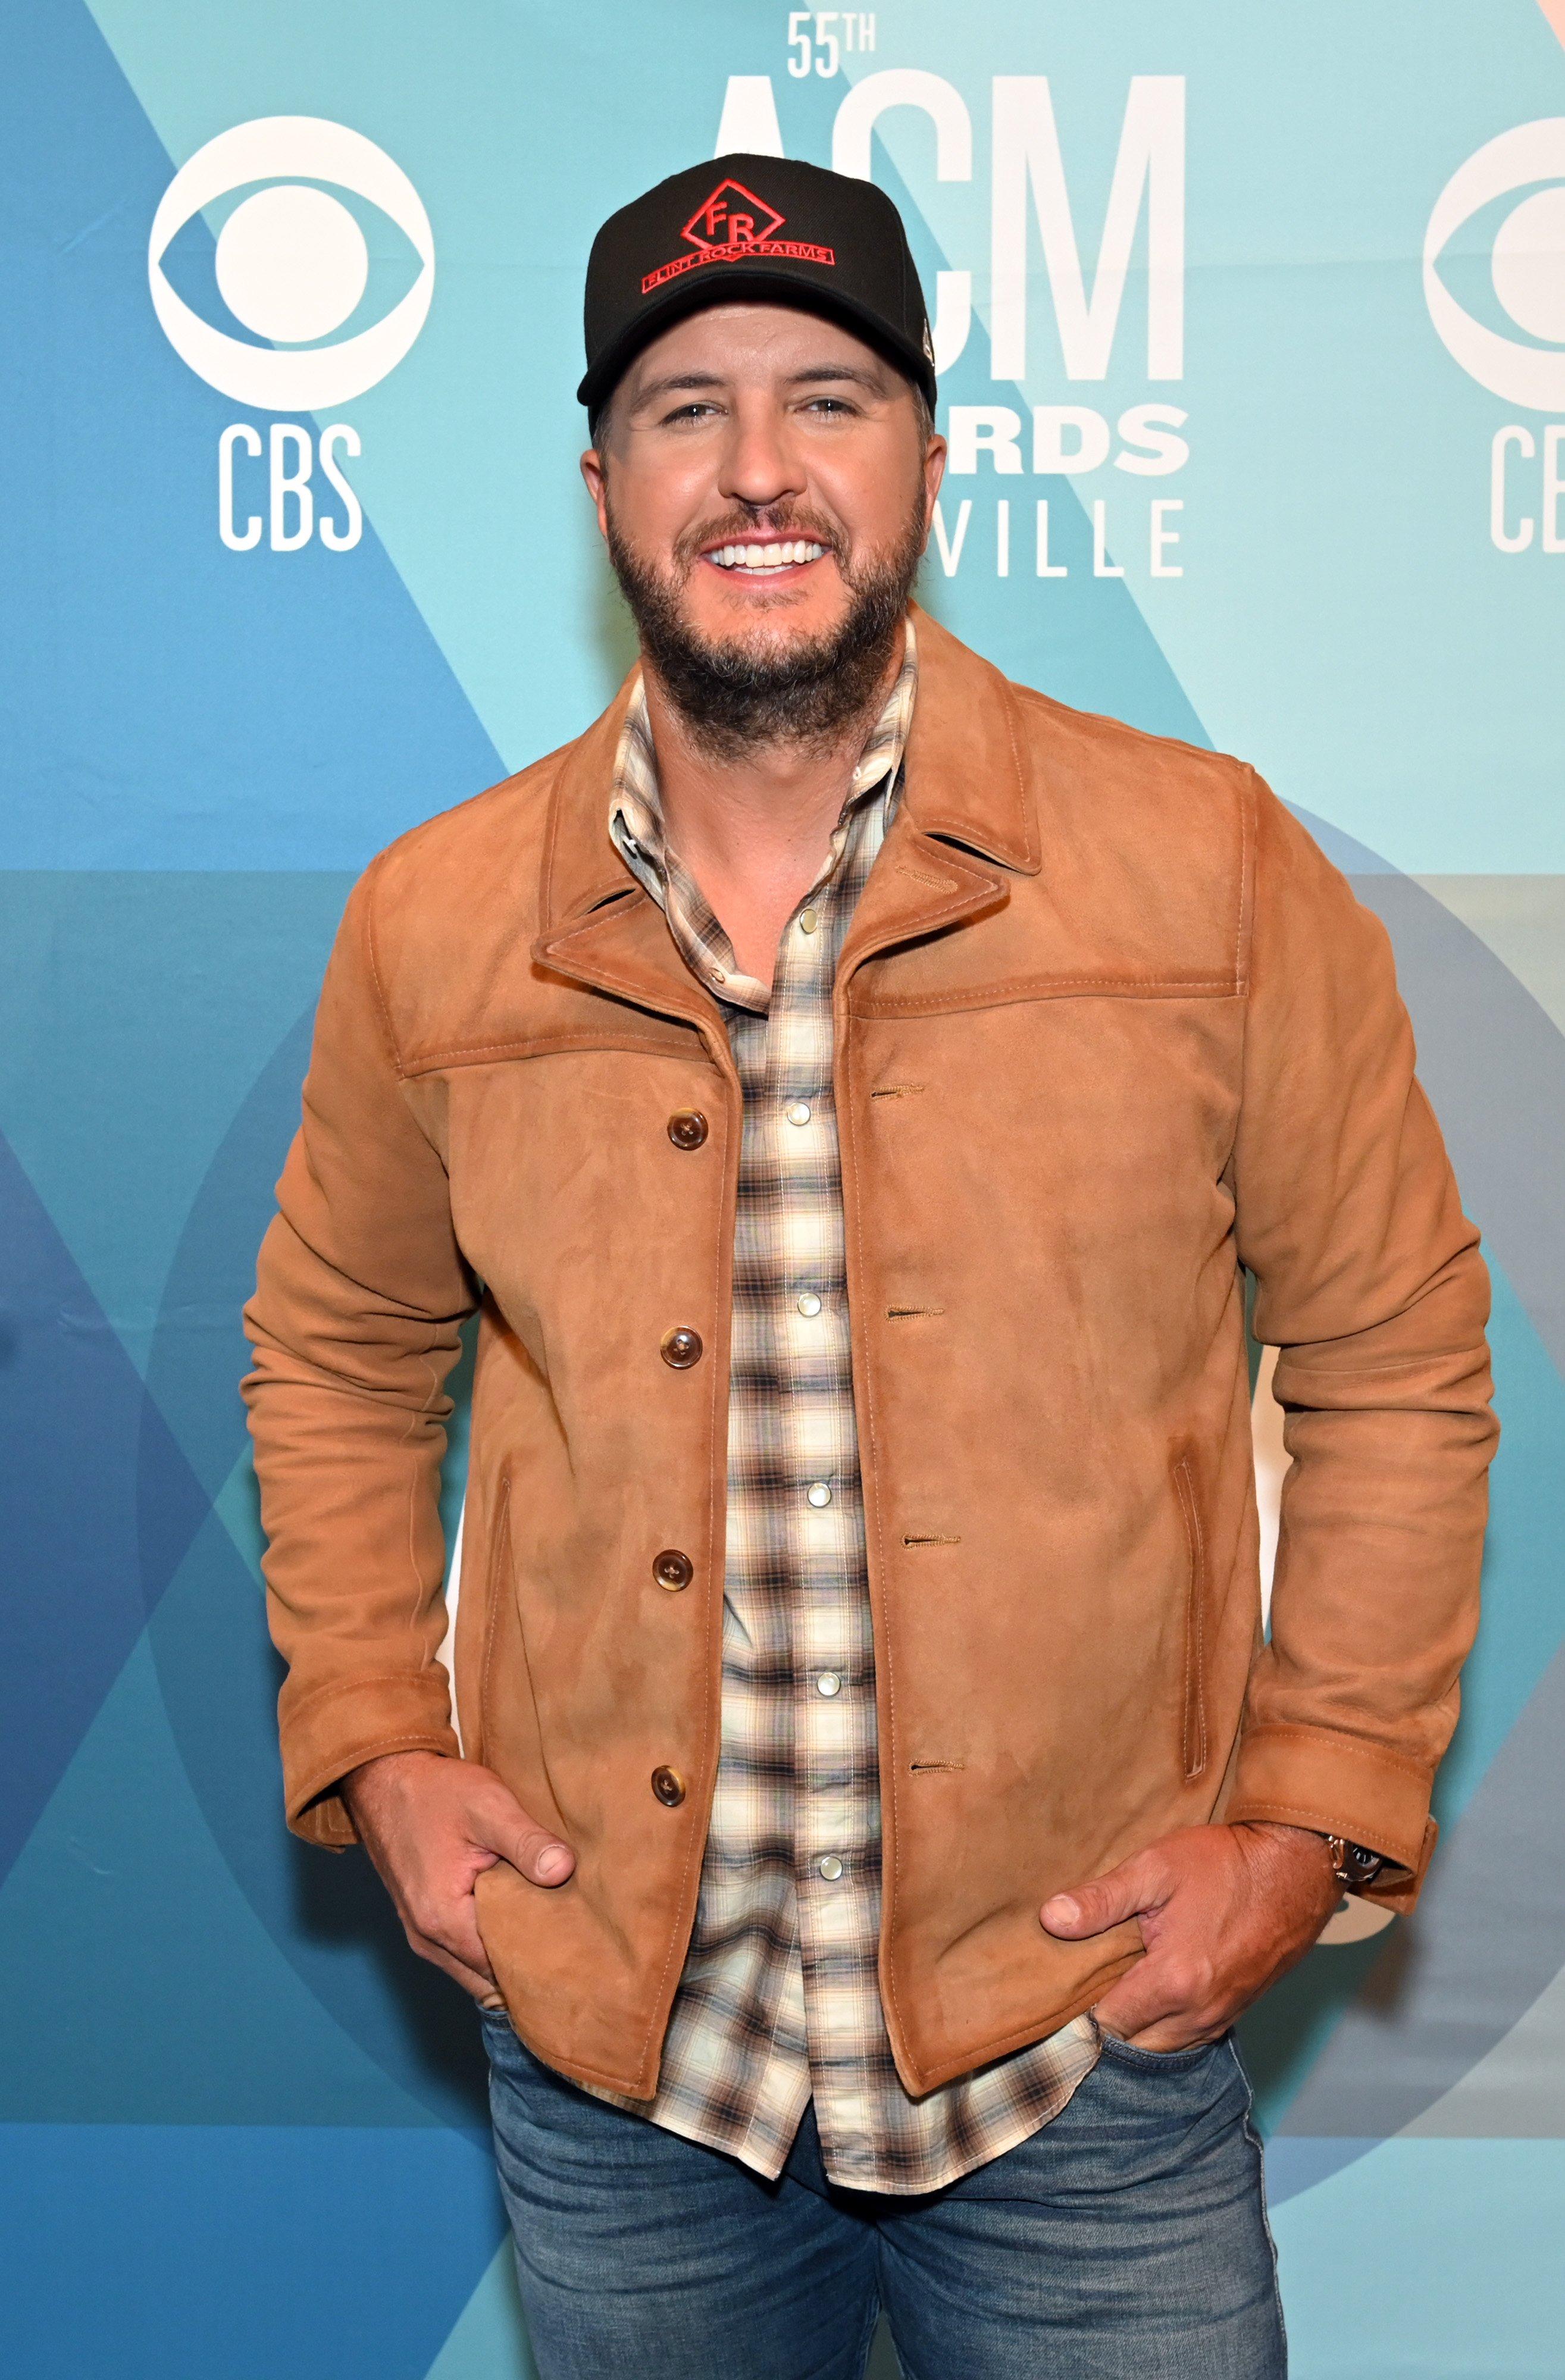 Luke Bryan attends the 55th Academy of Country Music Awards at the Grand Ole Opry on September 14, 2020 in Nashville, Tennessee | Photo: Getty Images